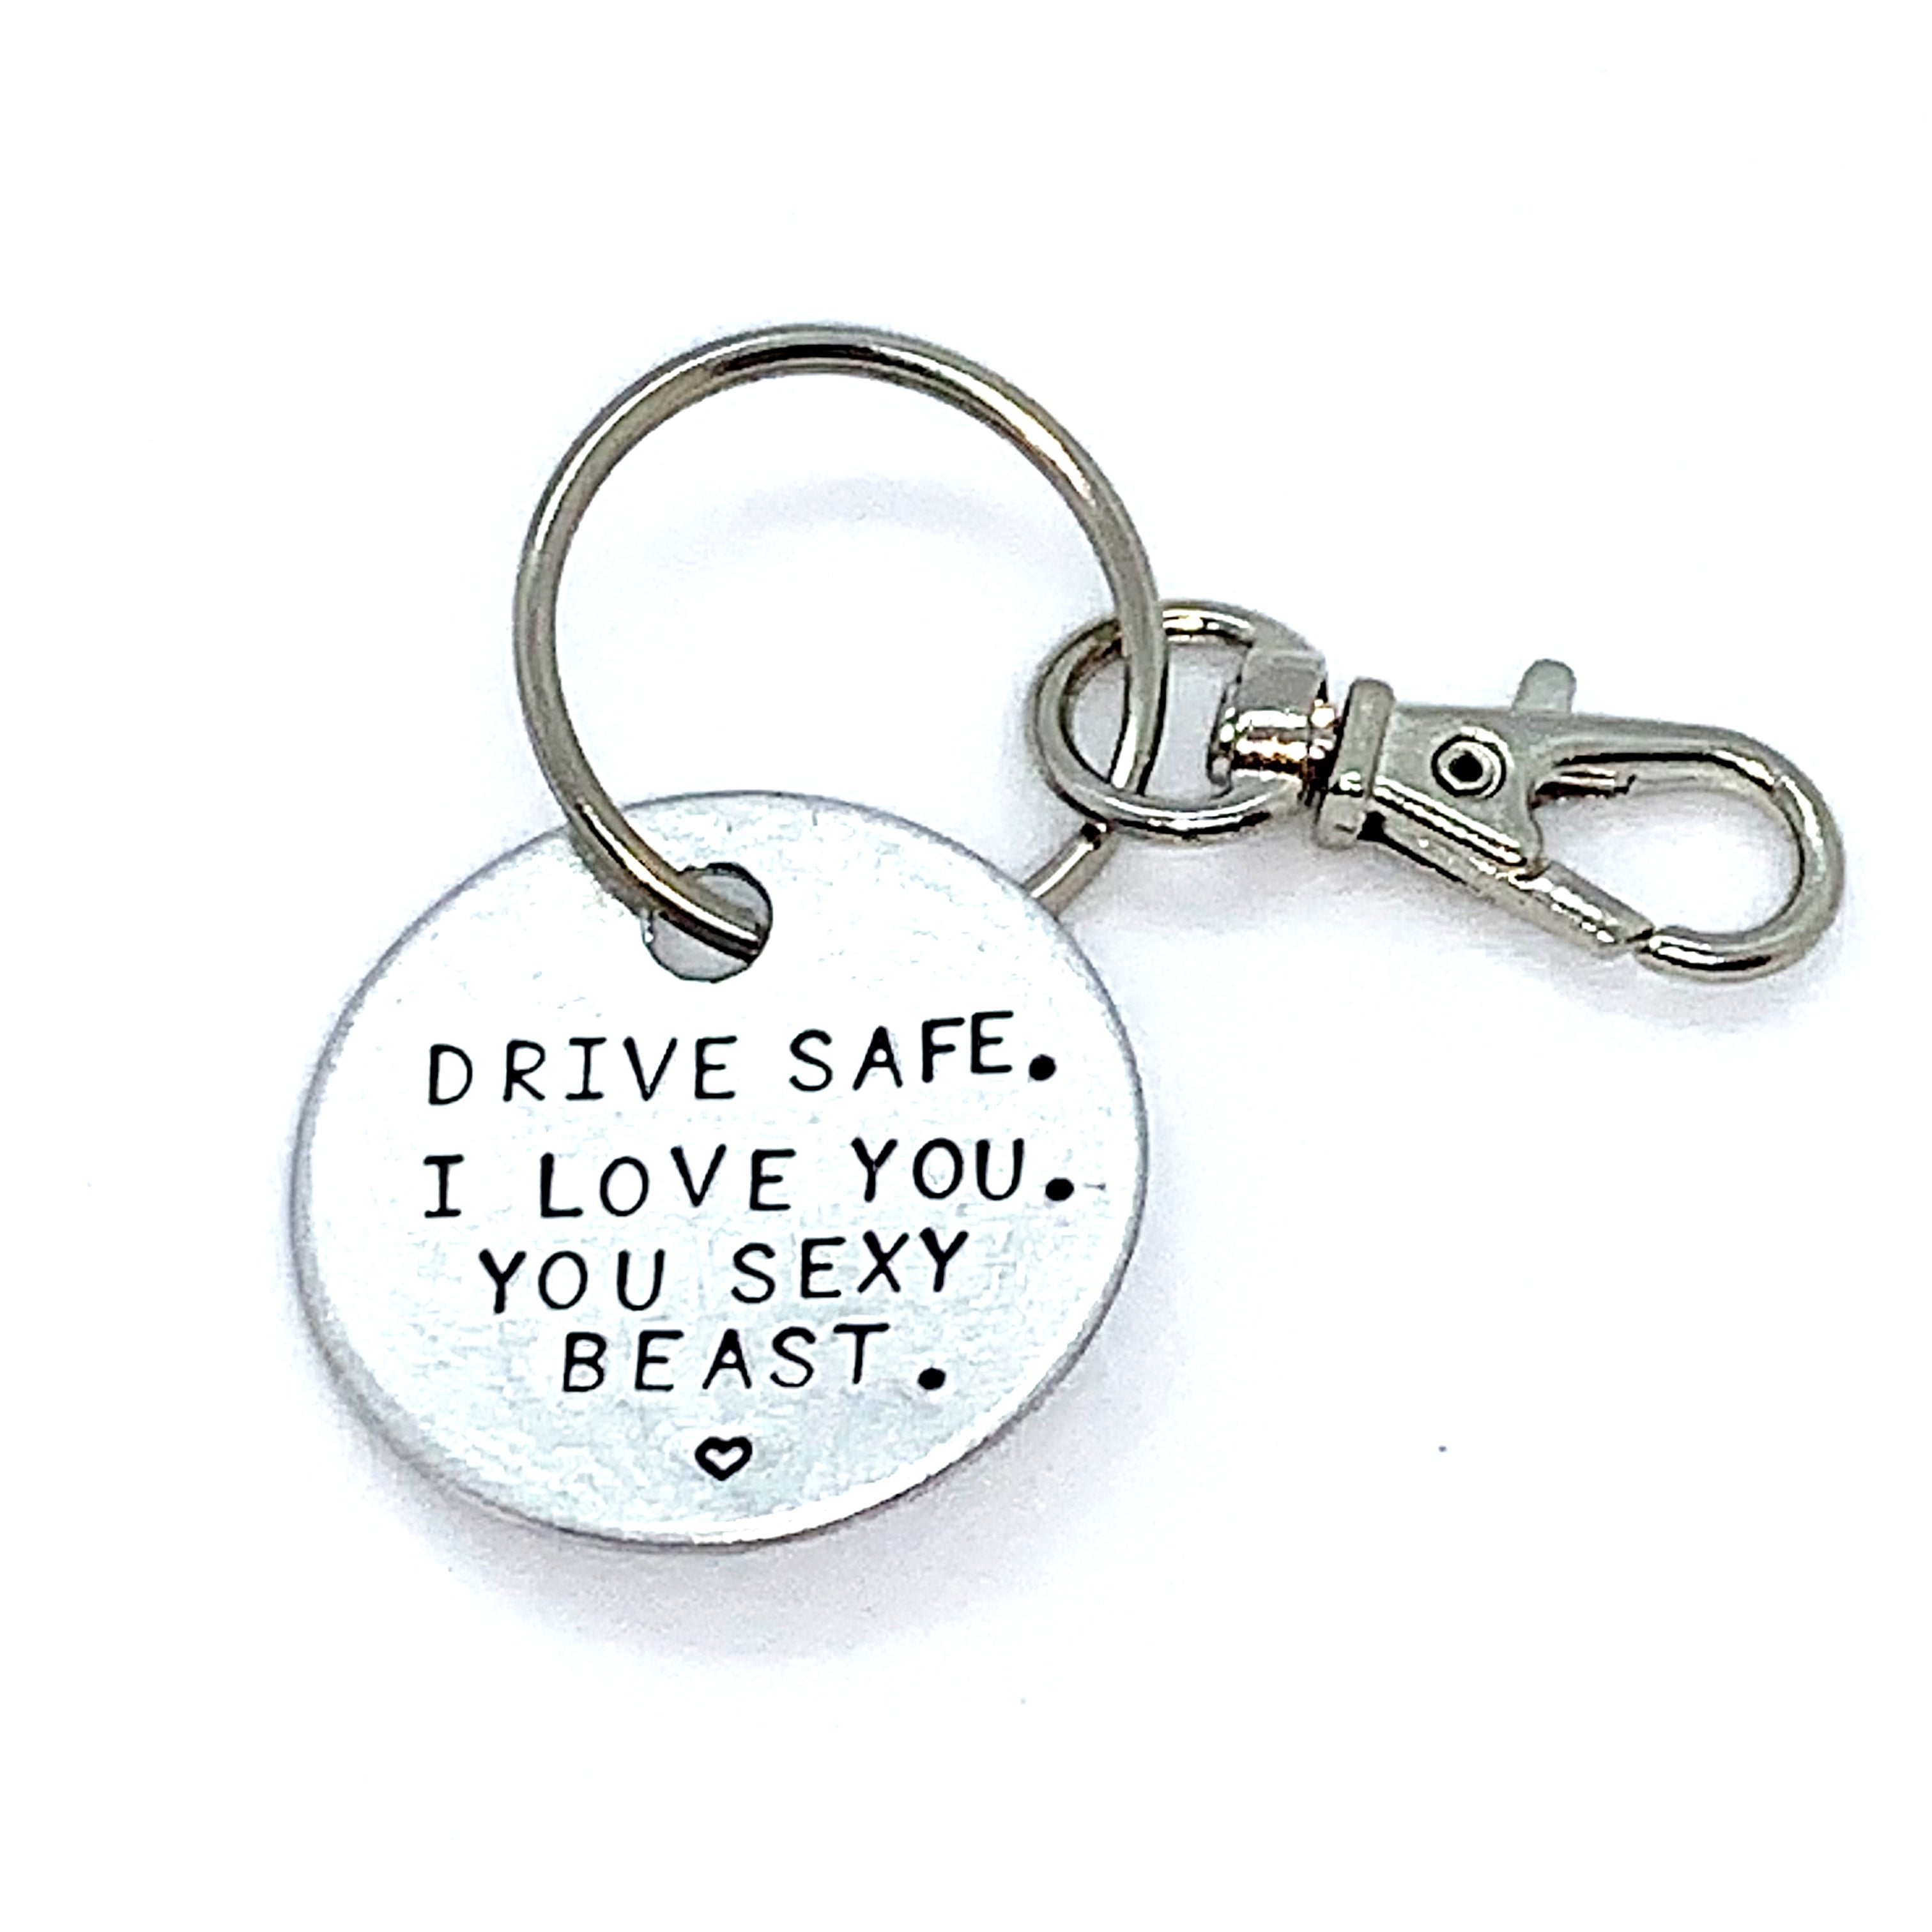 Key Chain - Simple Circle - Drive Safe. I Love You. You Sexy Beast.